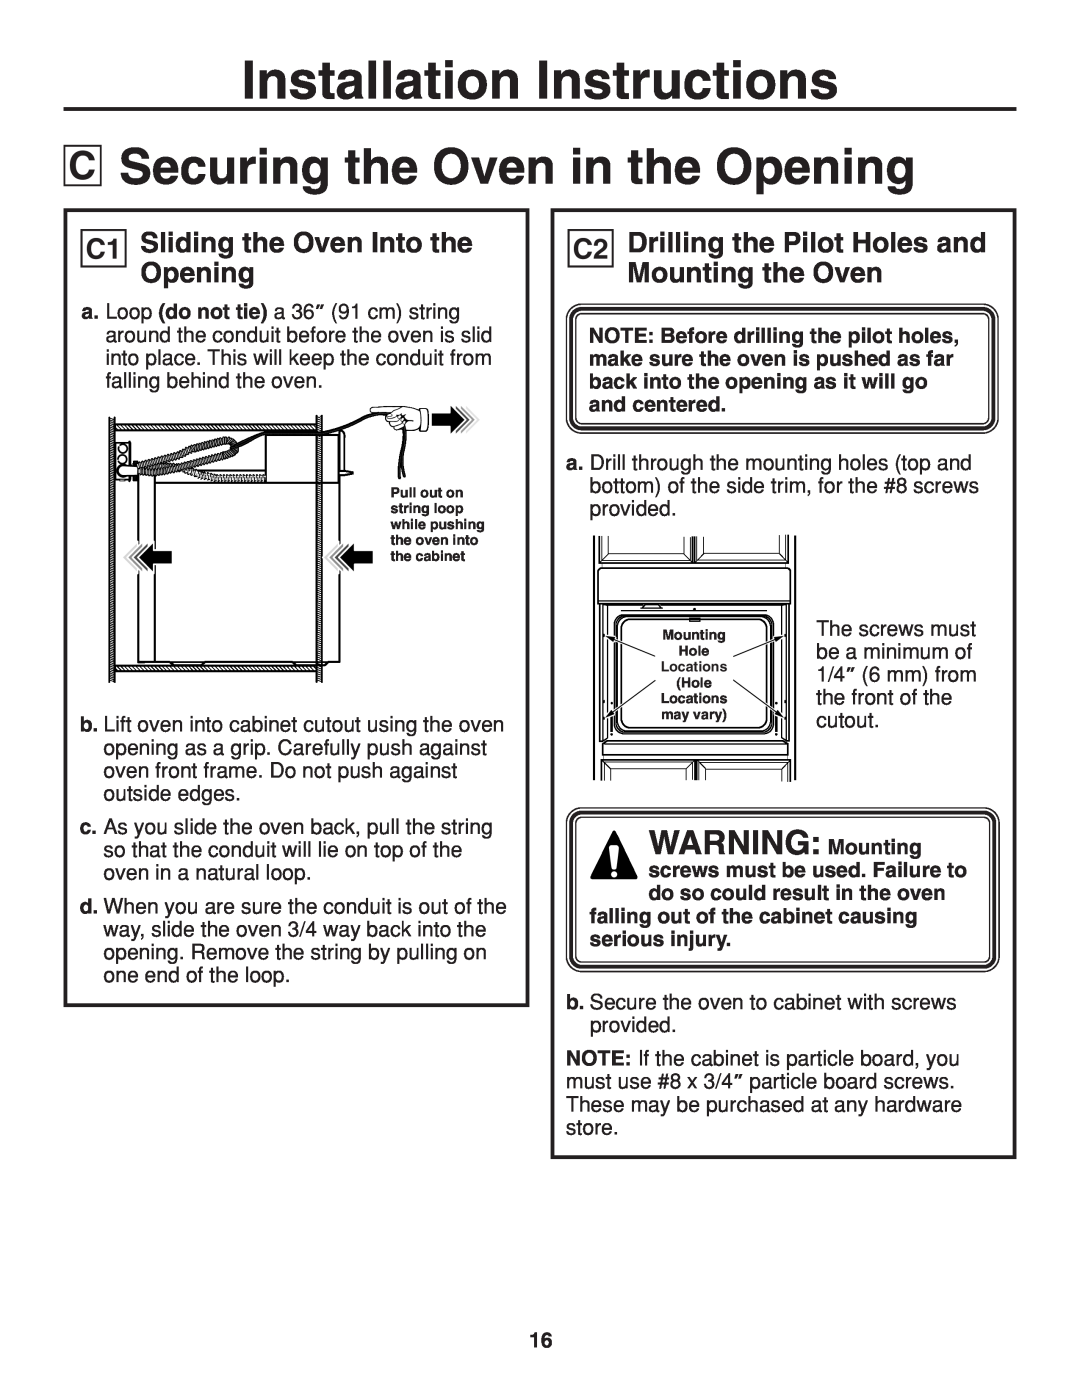 GE r08654v-1 Securing the Oven in the Opening, WARNING Mounting, C1 Sliding the Oven Into the Opening 